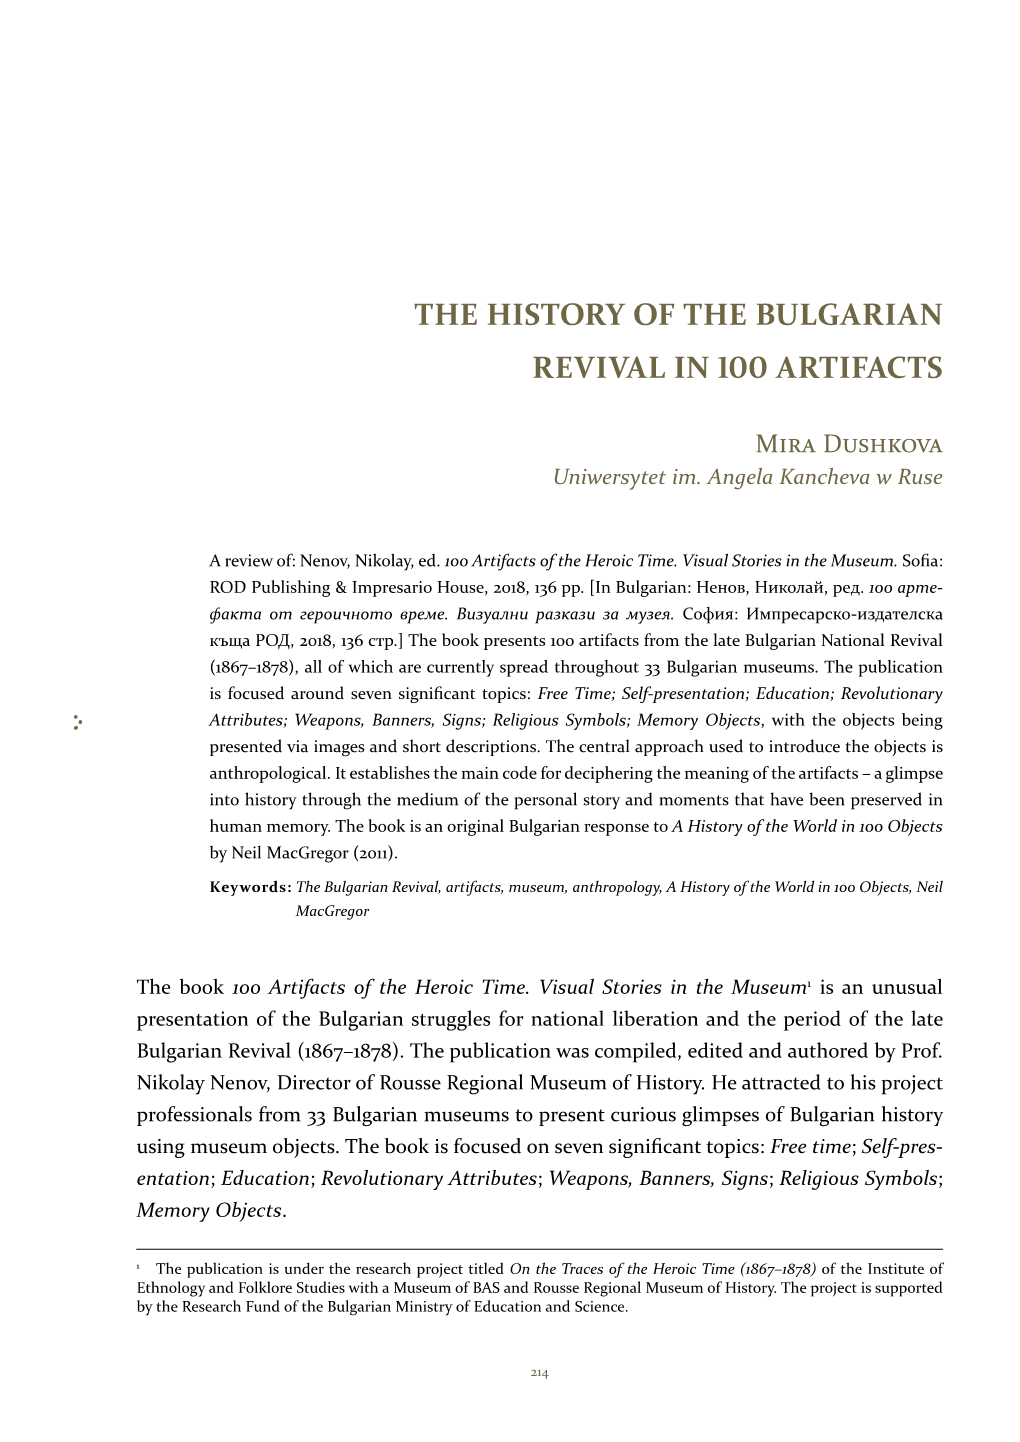 The History of the Bulgarian Revival in Artifacts